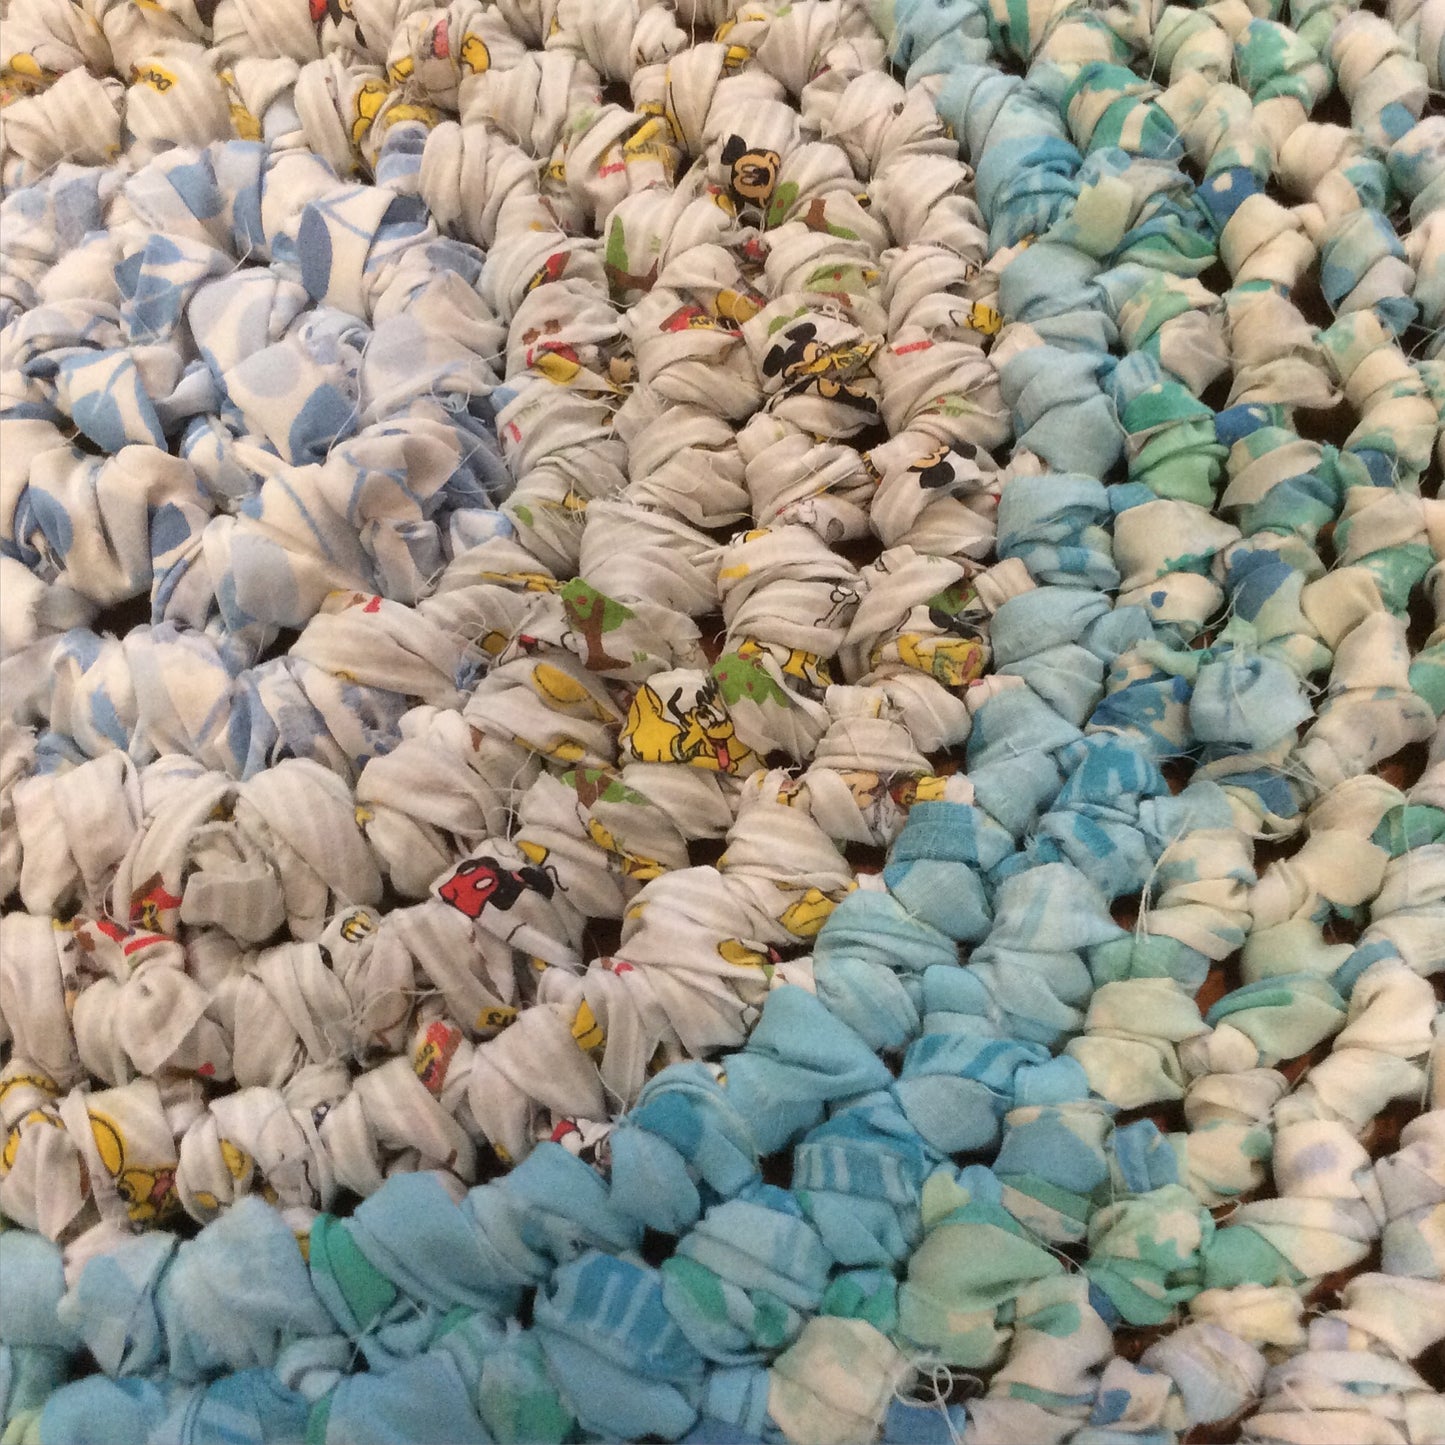 Make an Easy Round Rag Rug Using Recycled Sheets